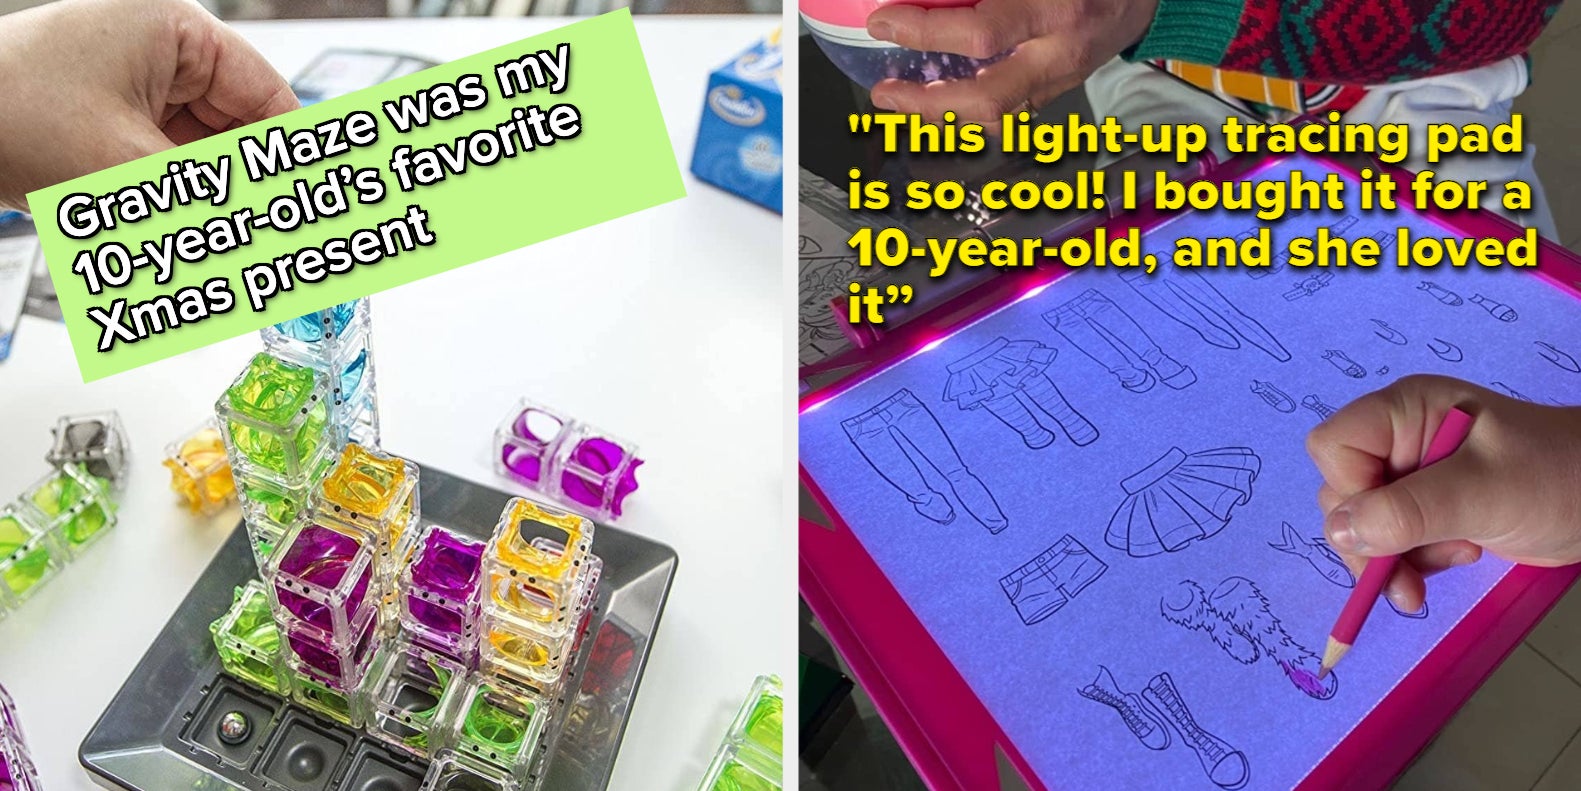 13 Best Toys and Gifts for 10 Year Olds in 2023, HGTV Top Picks